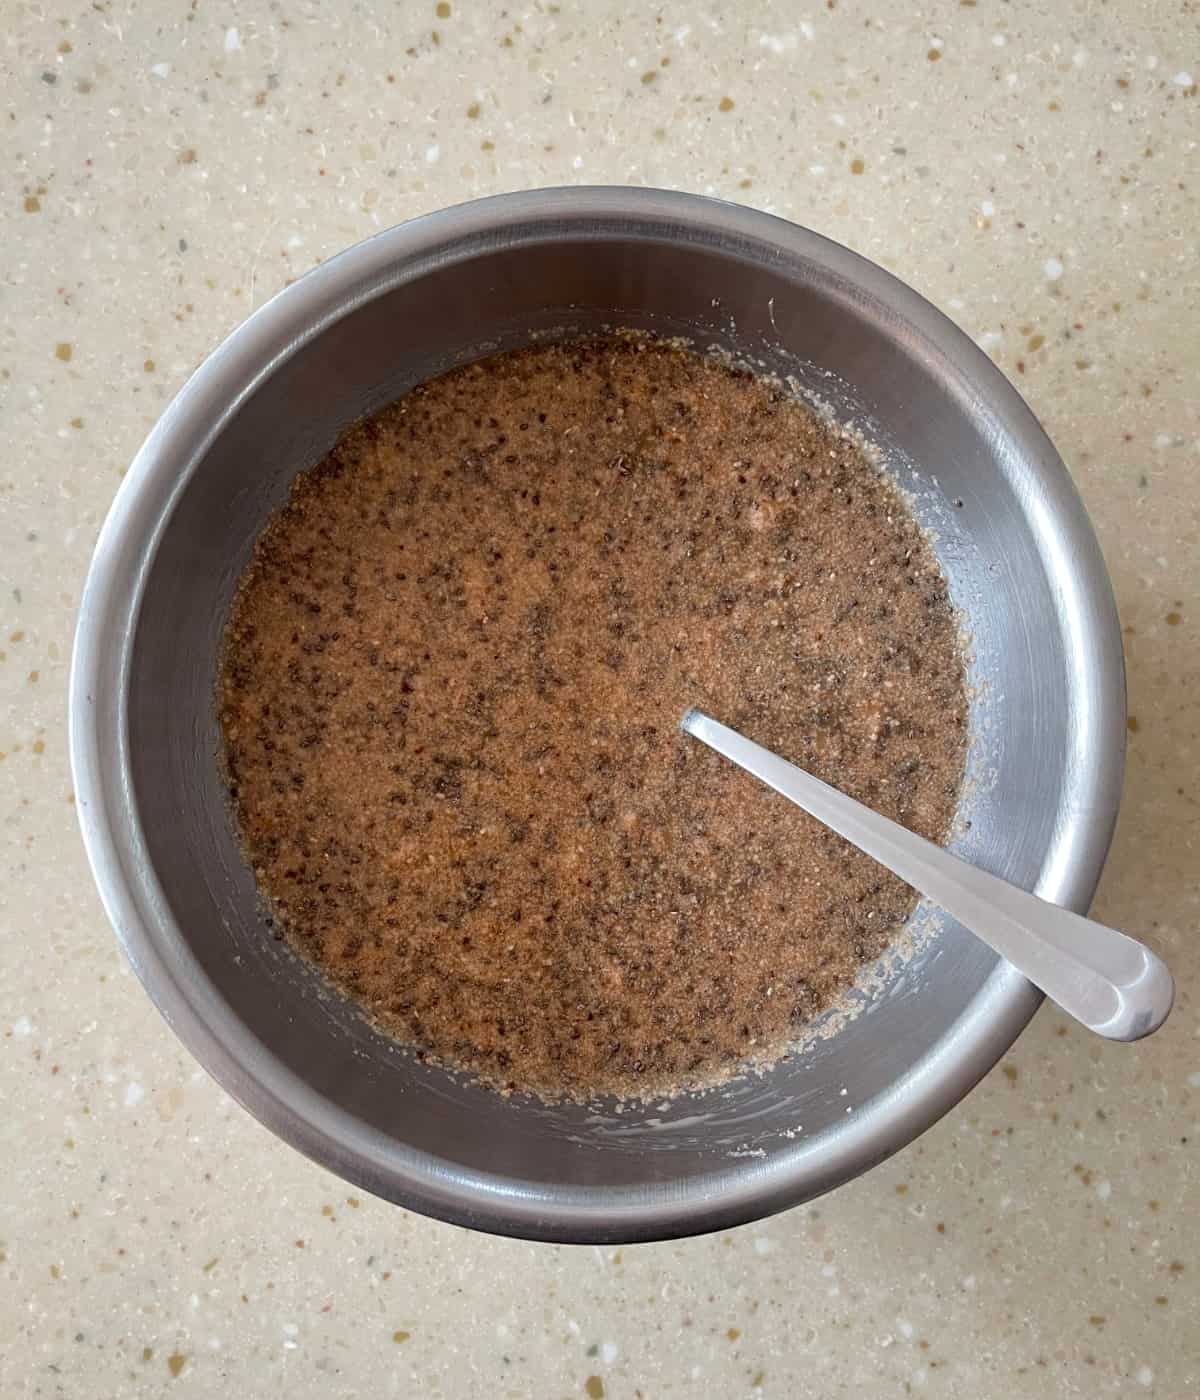 Mixing cappuccino chia seed pudding in mixing bowl with spoon.